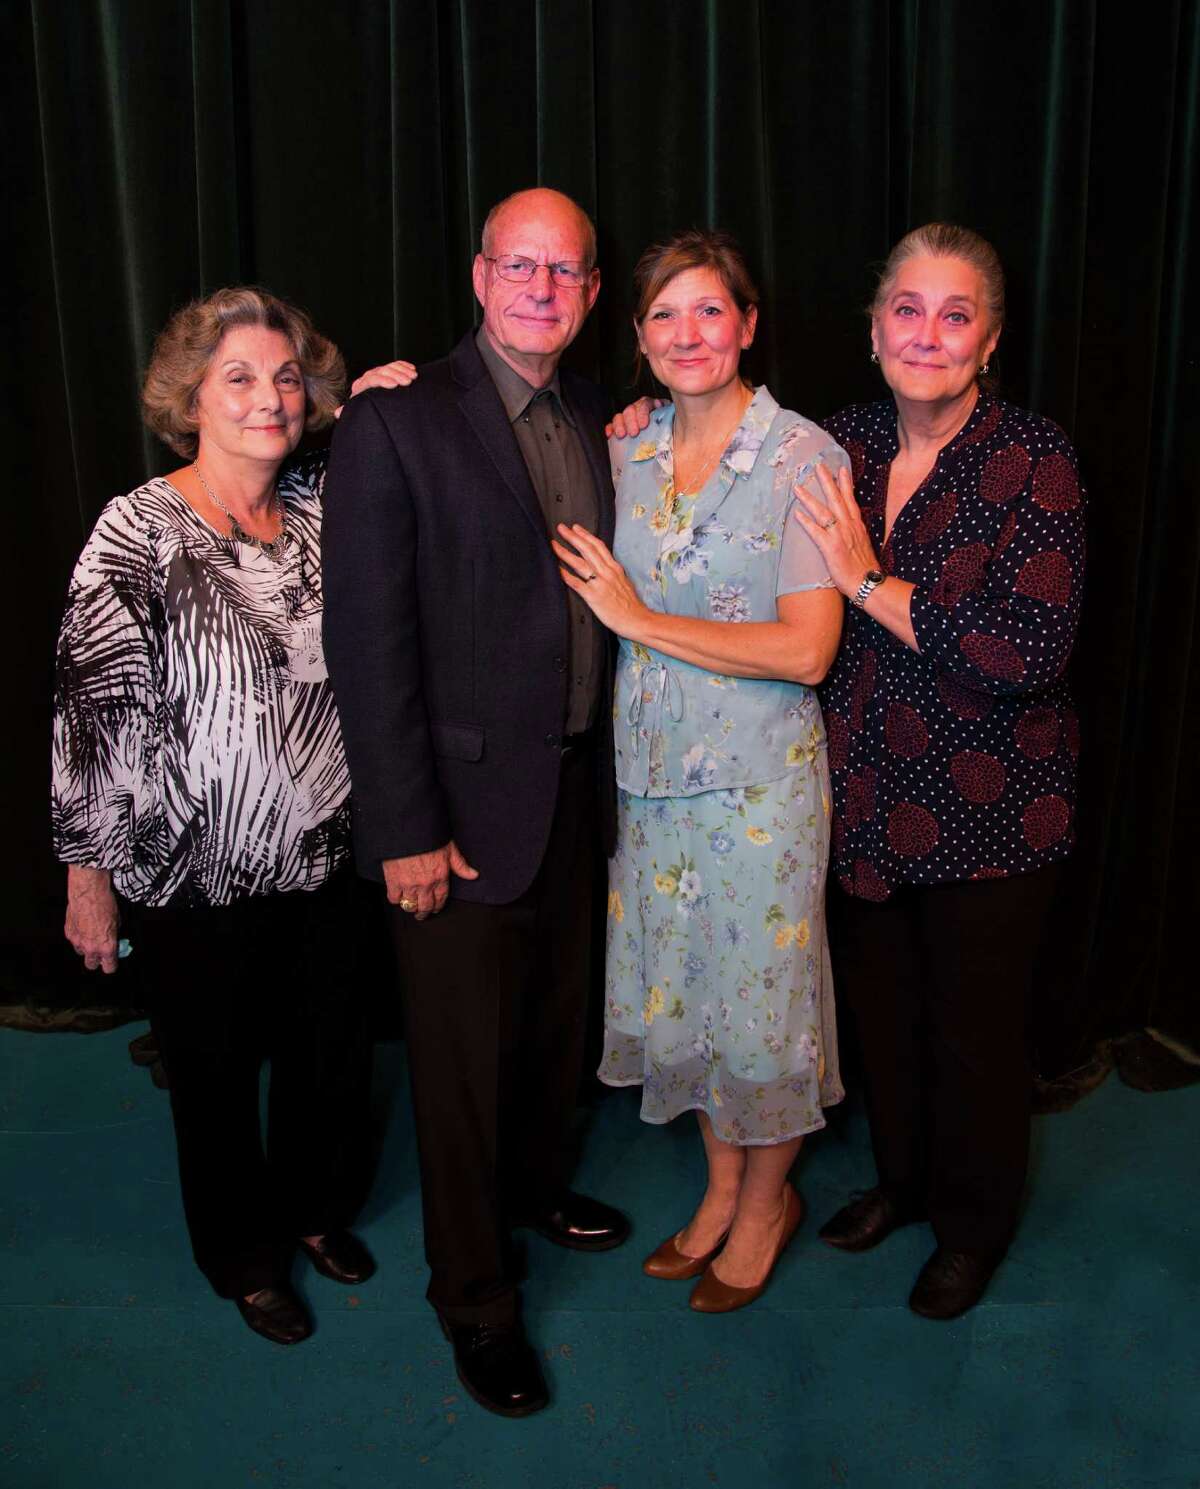 The Players Theatre Company continues its 50th anniversary season with "The Cemetery Club" opening at the Owen Theatre Jan. 27. Pictured from left to right are Terry Lynn Hale, Mark Wilson, Cindy Siple and Lisa Schofield. Visit www.owentheatre.com for ticket information.